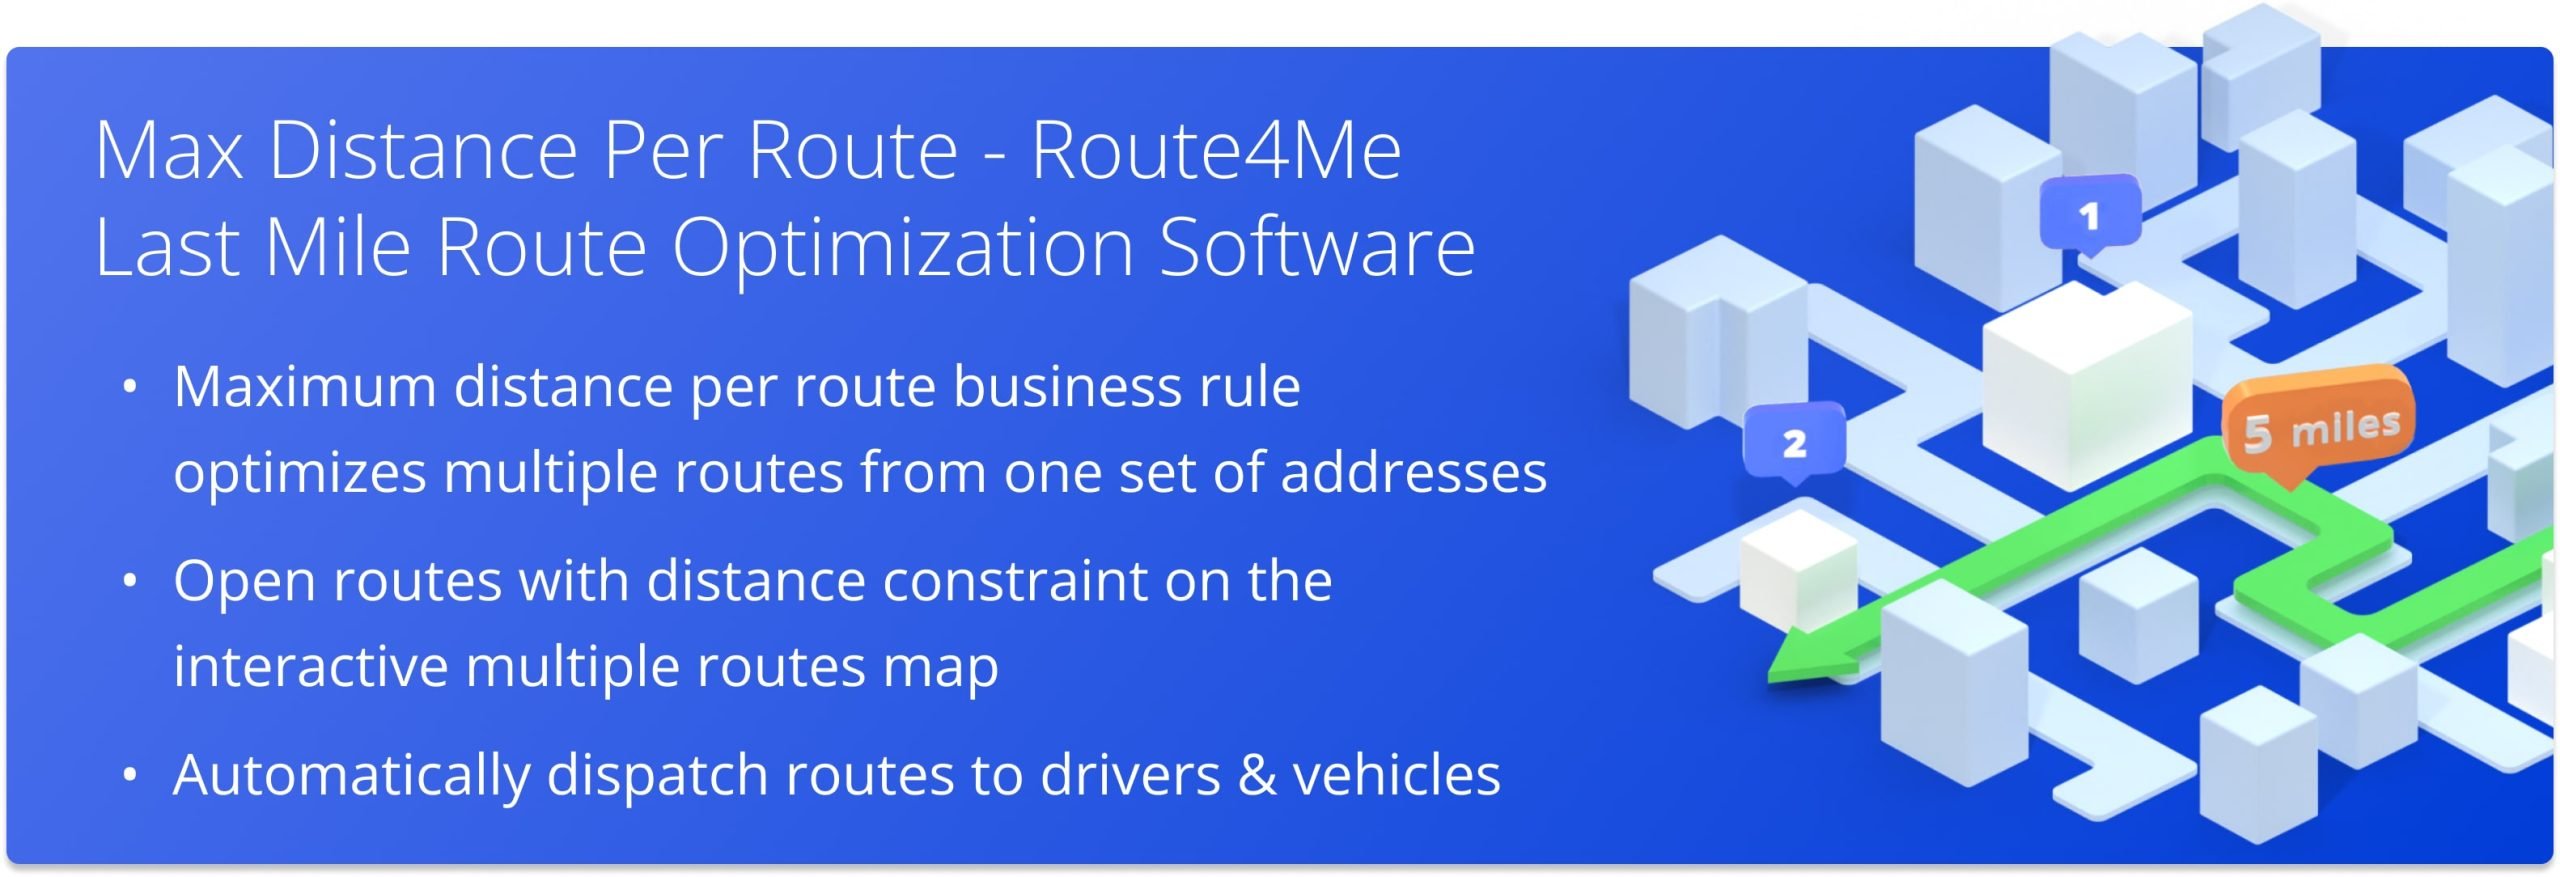 Plan multiple routes with limited max distance from a single set of addresses automatically with Route4Me's Max Distance Business Rule.